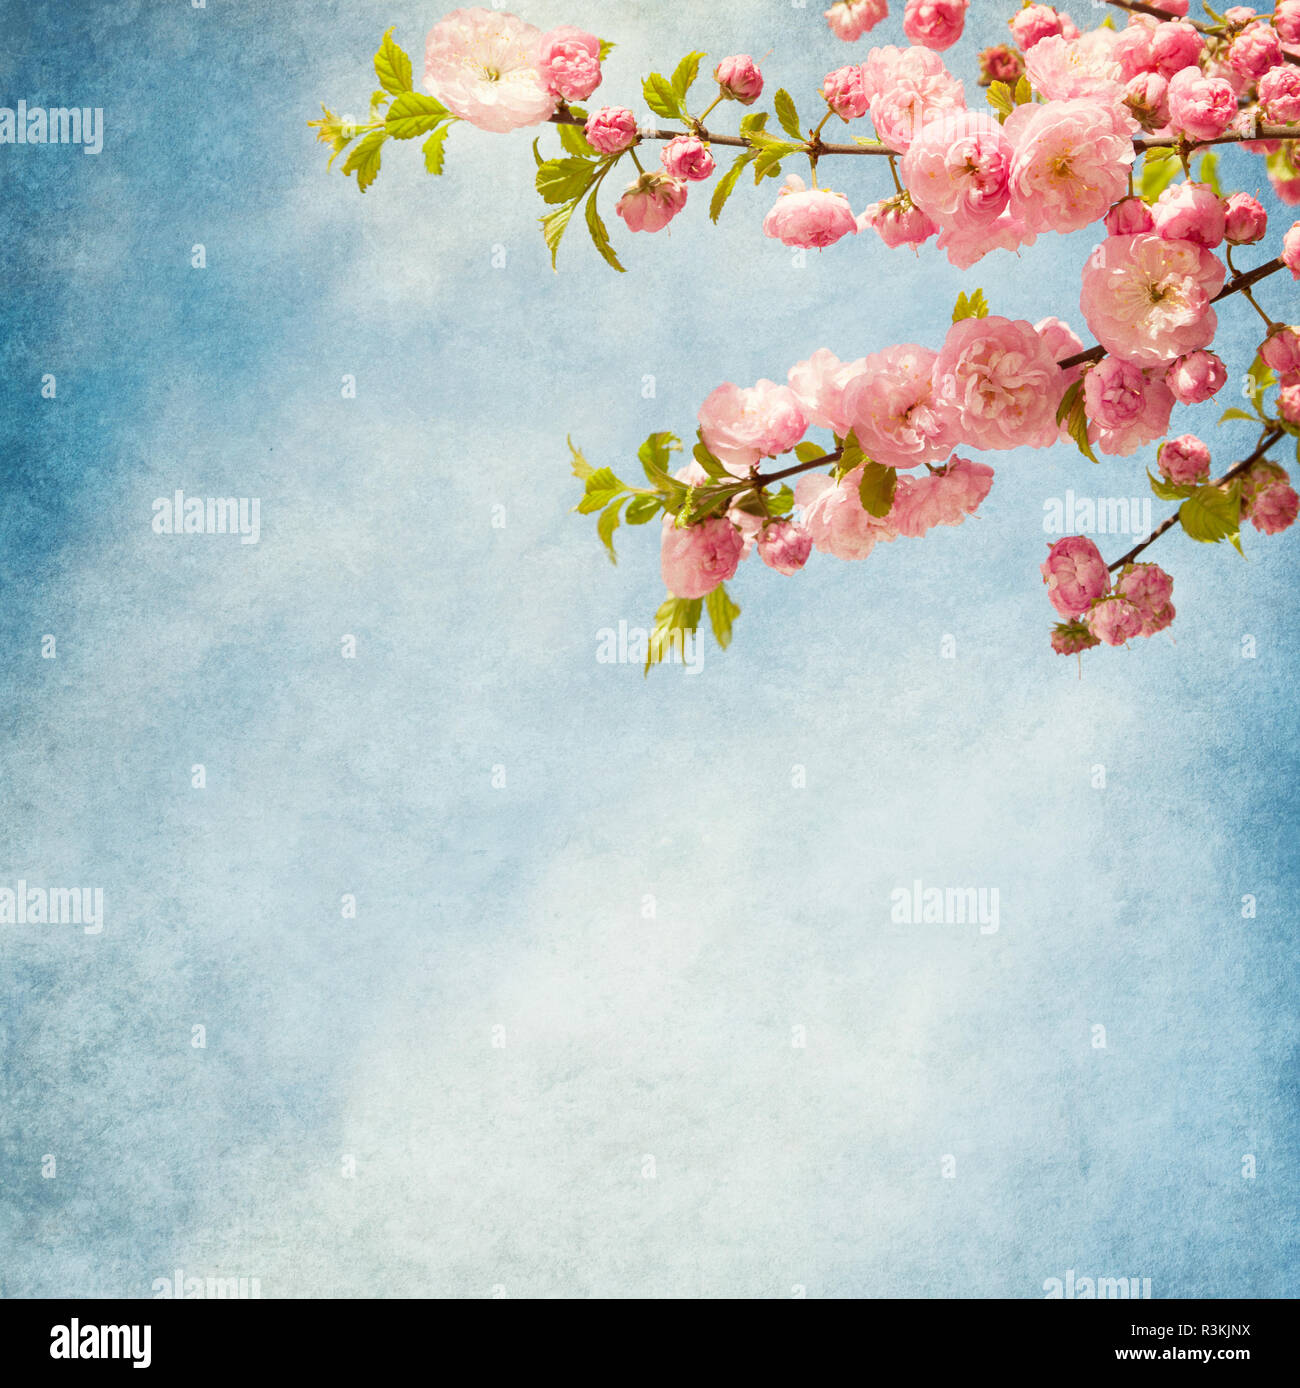 branches with beautiful pink flowers against the blue sky. Amygdalus triloba. Added paper texture. Stock Photo